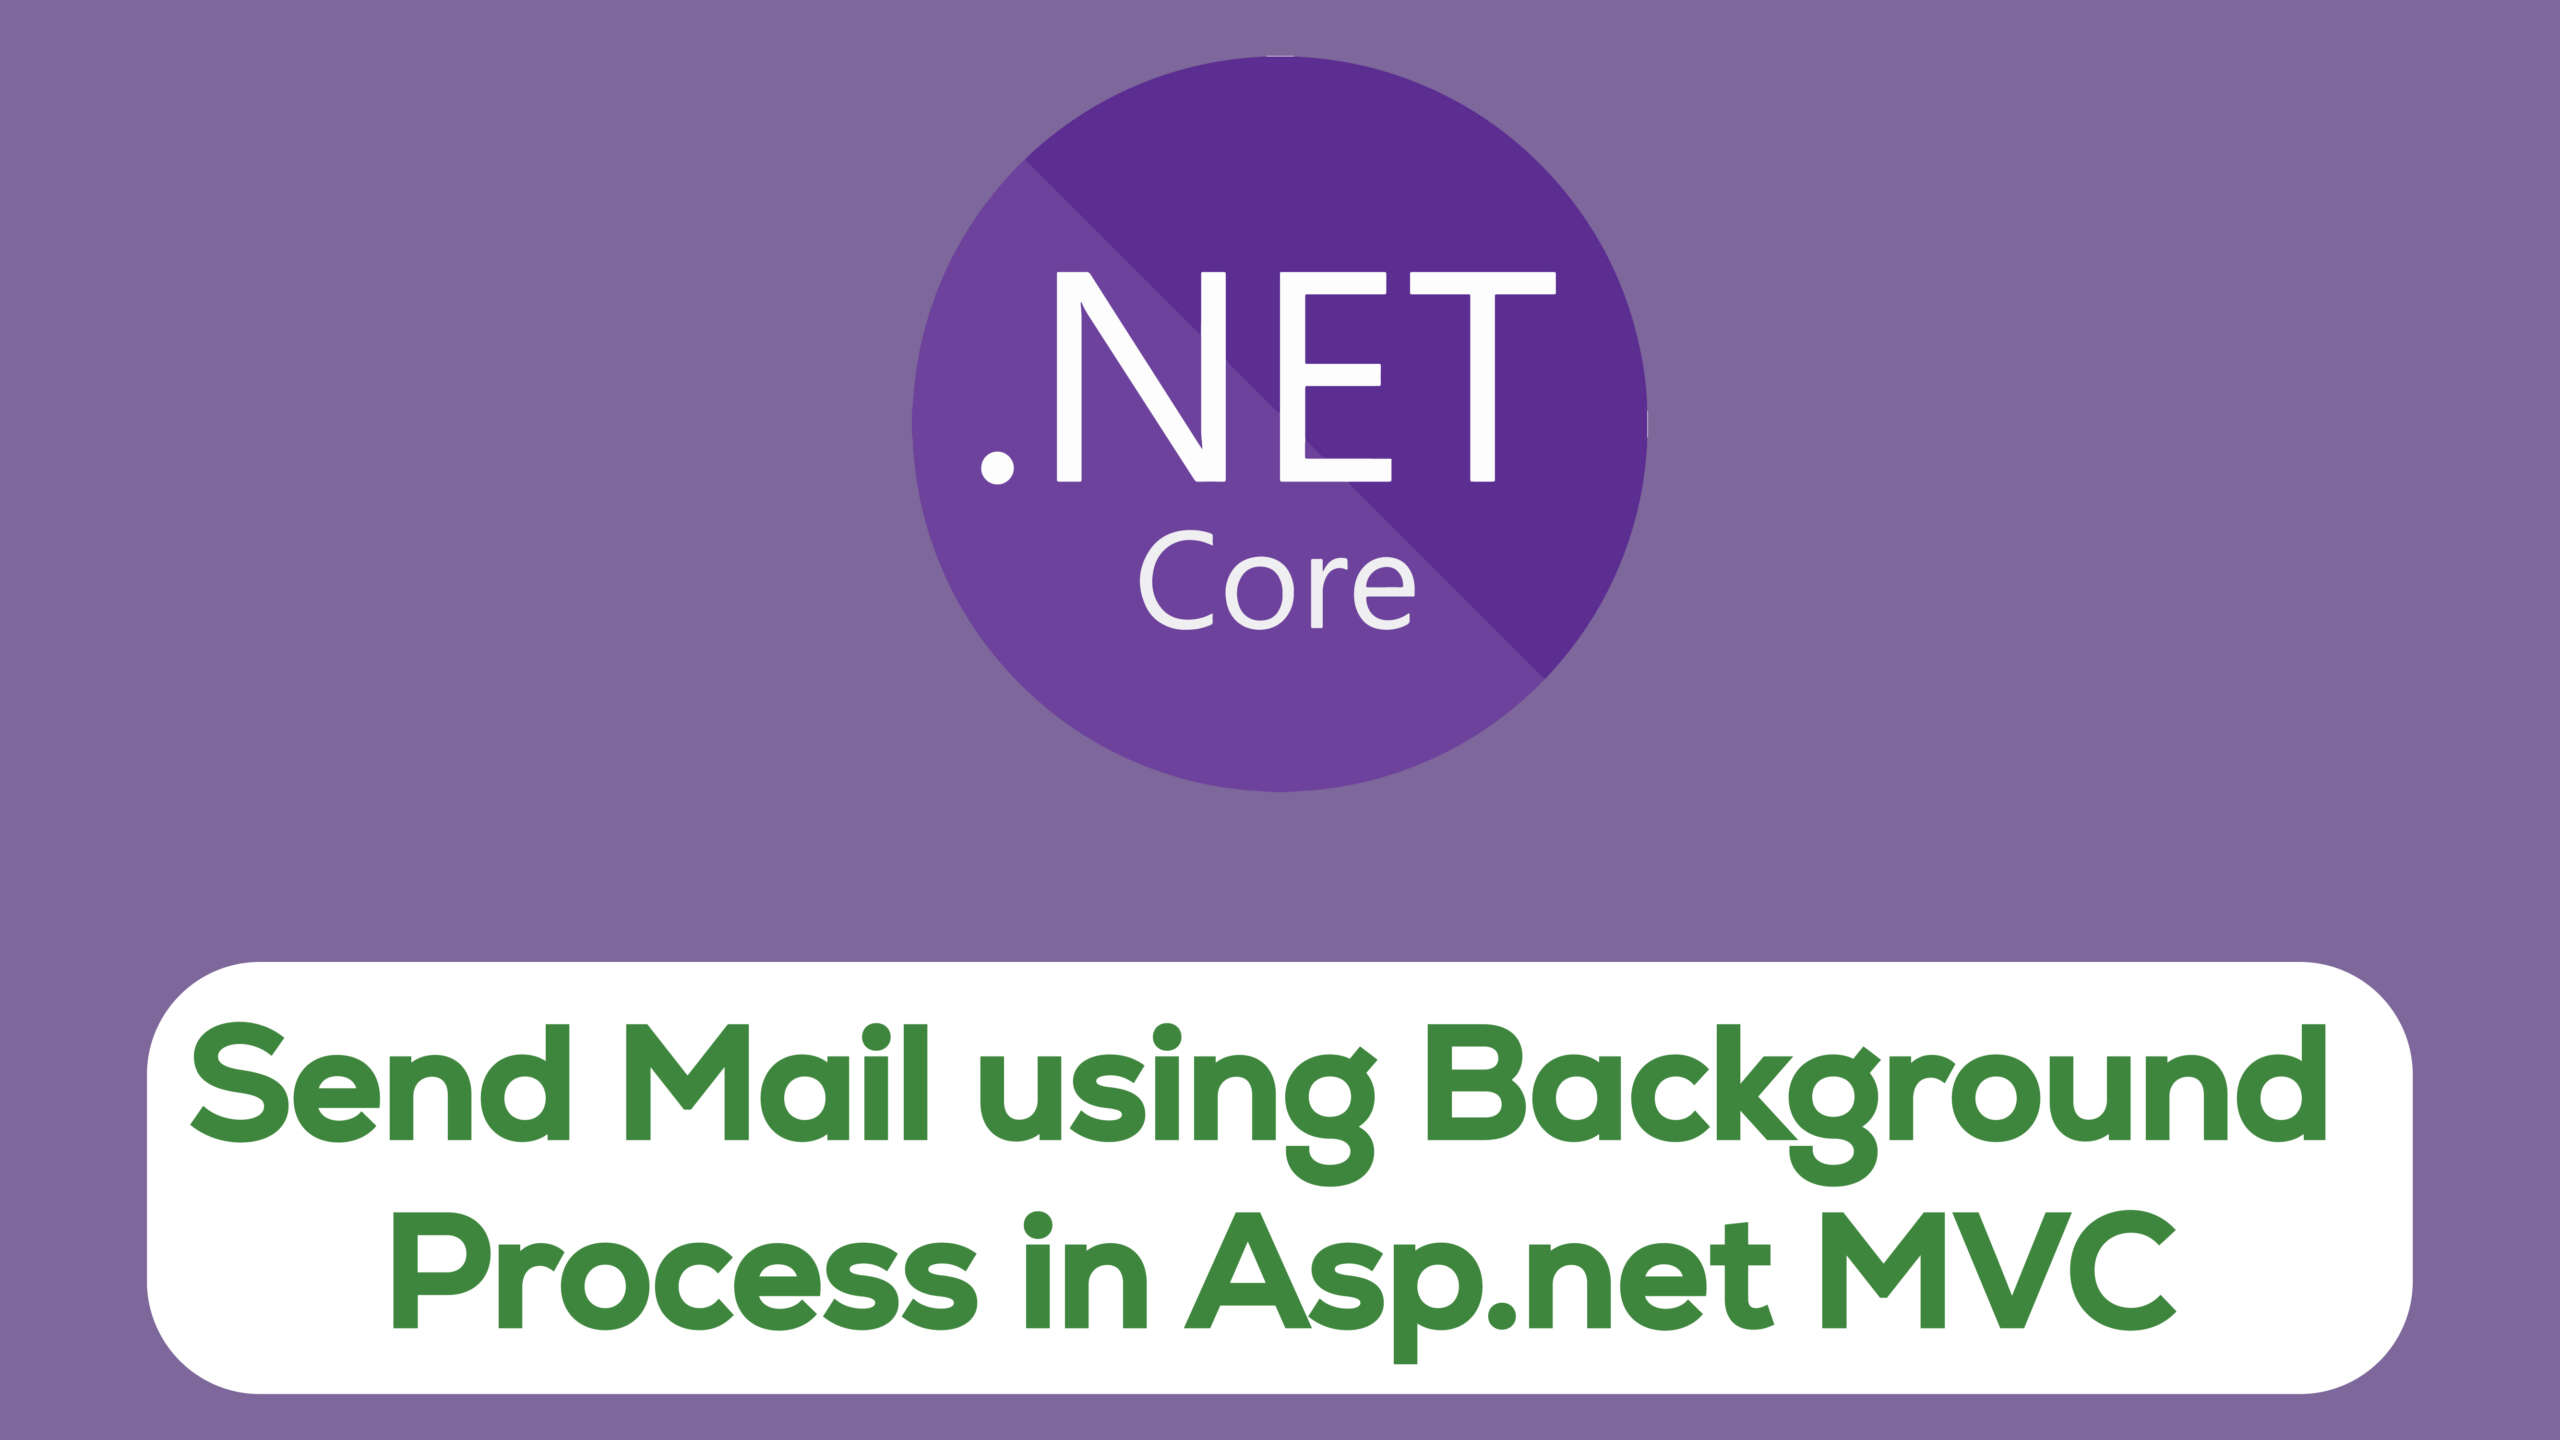 How to send E-Mail using Background Process in Asp.net MVC